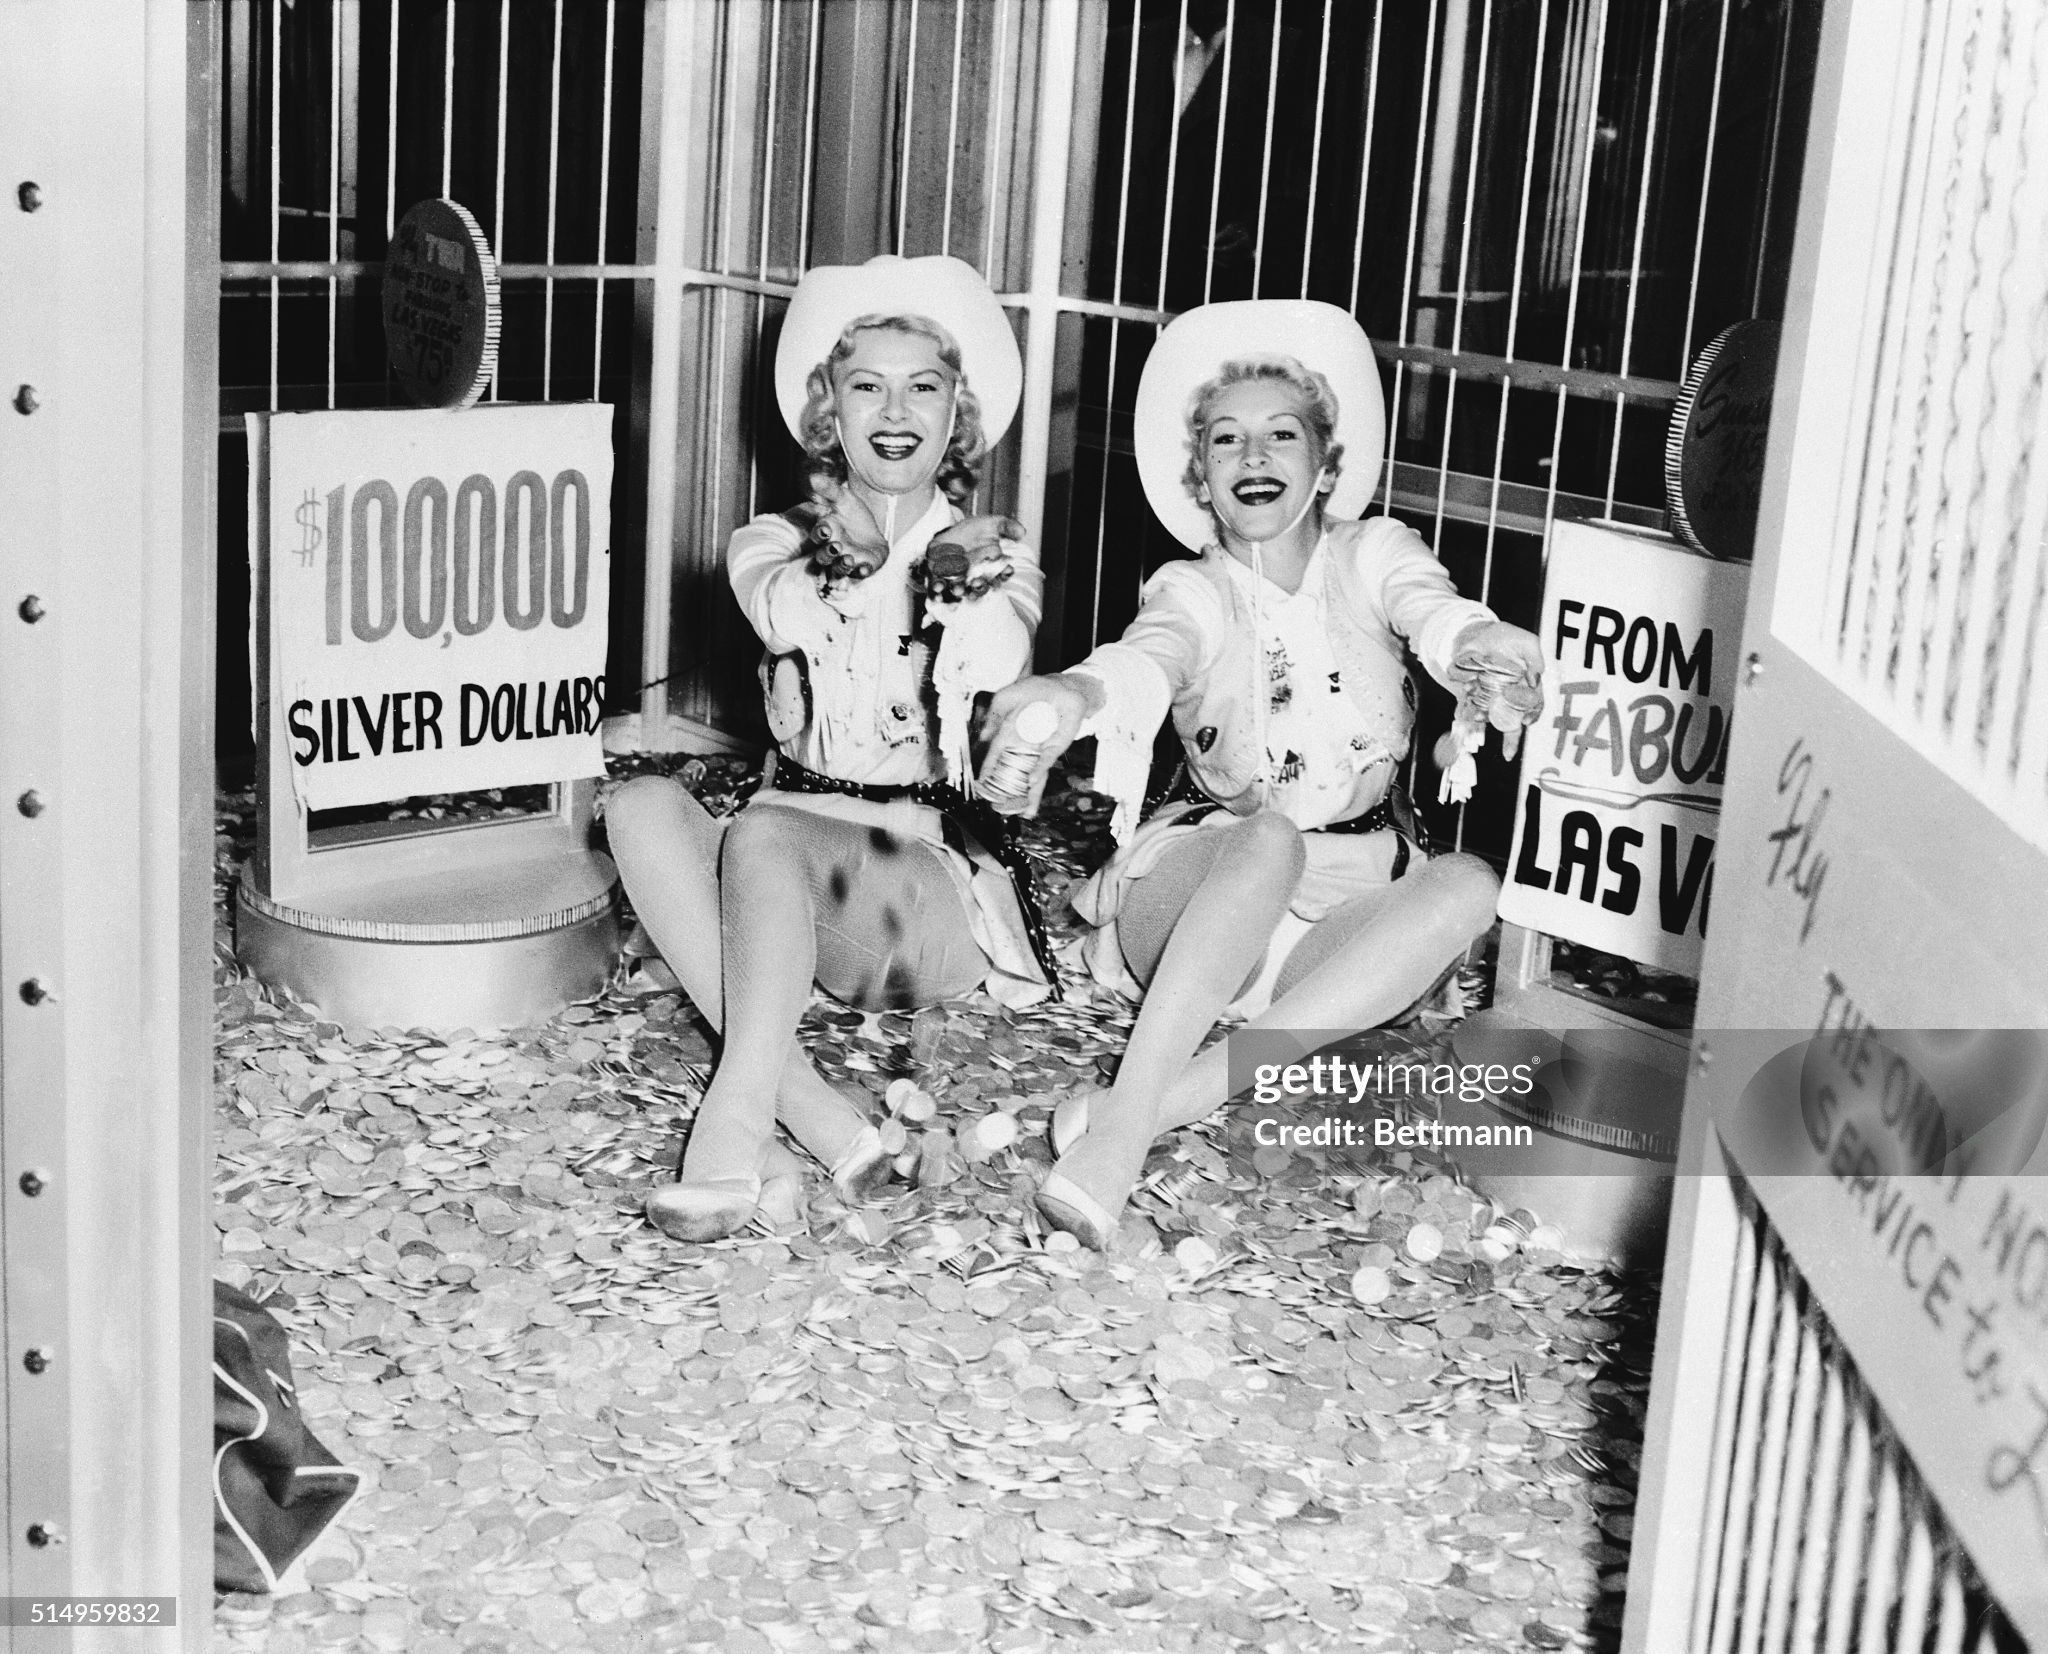 In a Chicago airlines ticket office, cowgirls Jane Pike (left) and Karolee Kelly sit on a pile of 100,000 silver dollars, 5,900 pounds in weight, on 20 October 1954 to advertise the two main tourist attractions of Las Vegas: legalized gambling and women. For the next four days the girls would just sit in the TWA office and jingle the coins.